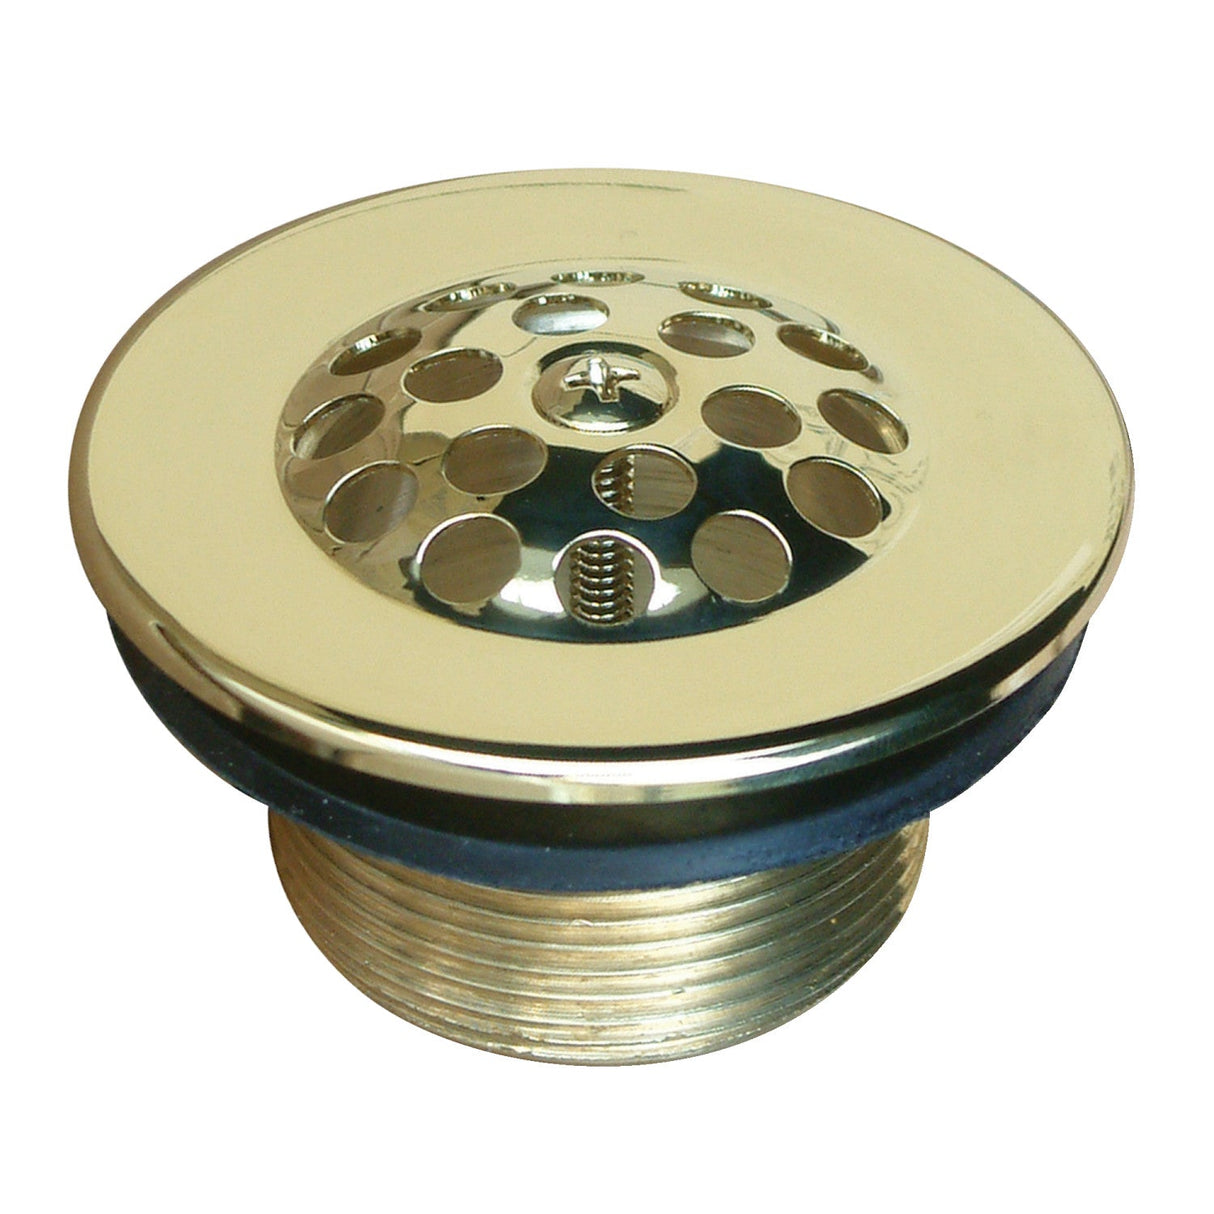 Made To Match DTL202 Brass Tub Strainer Drain, Polished Brass